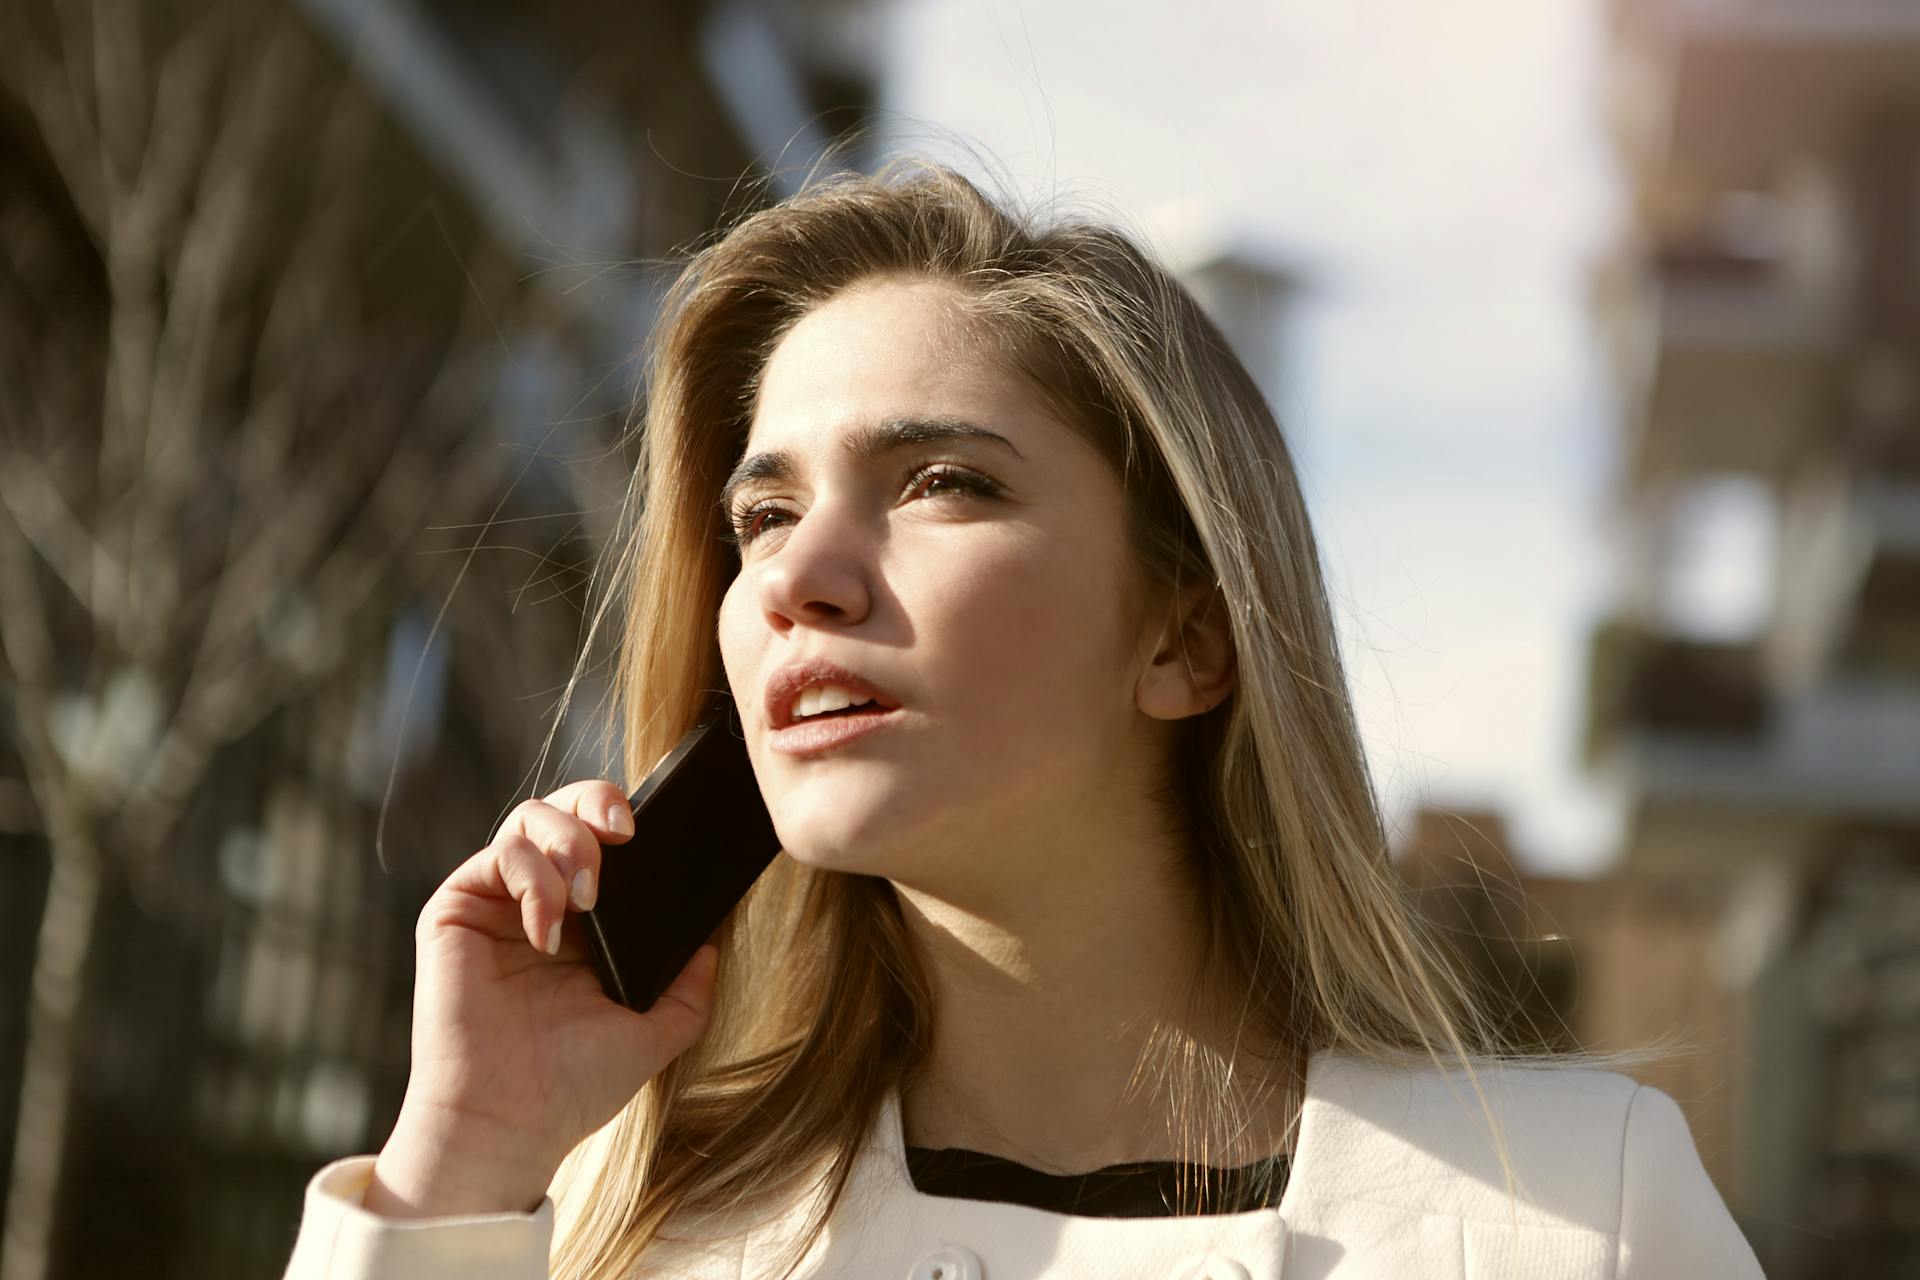 A woman in a white coat talking on the phone | Source: Pexels